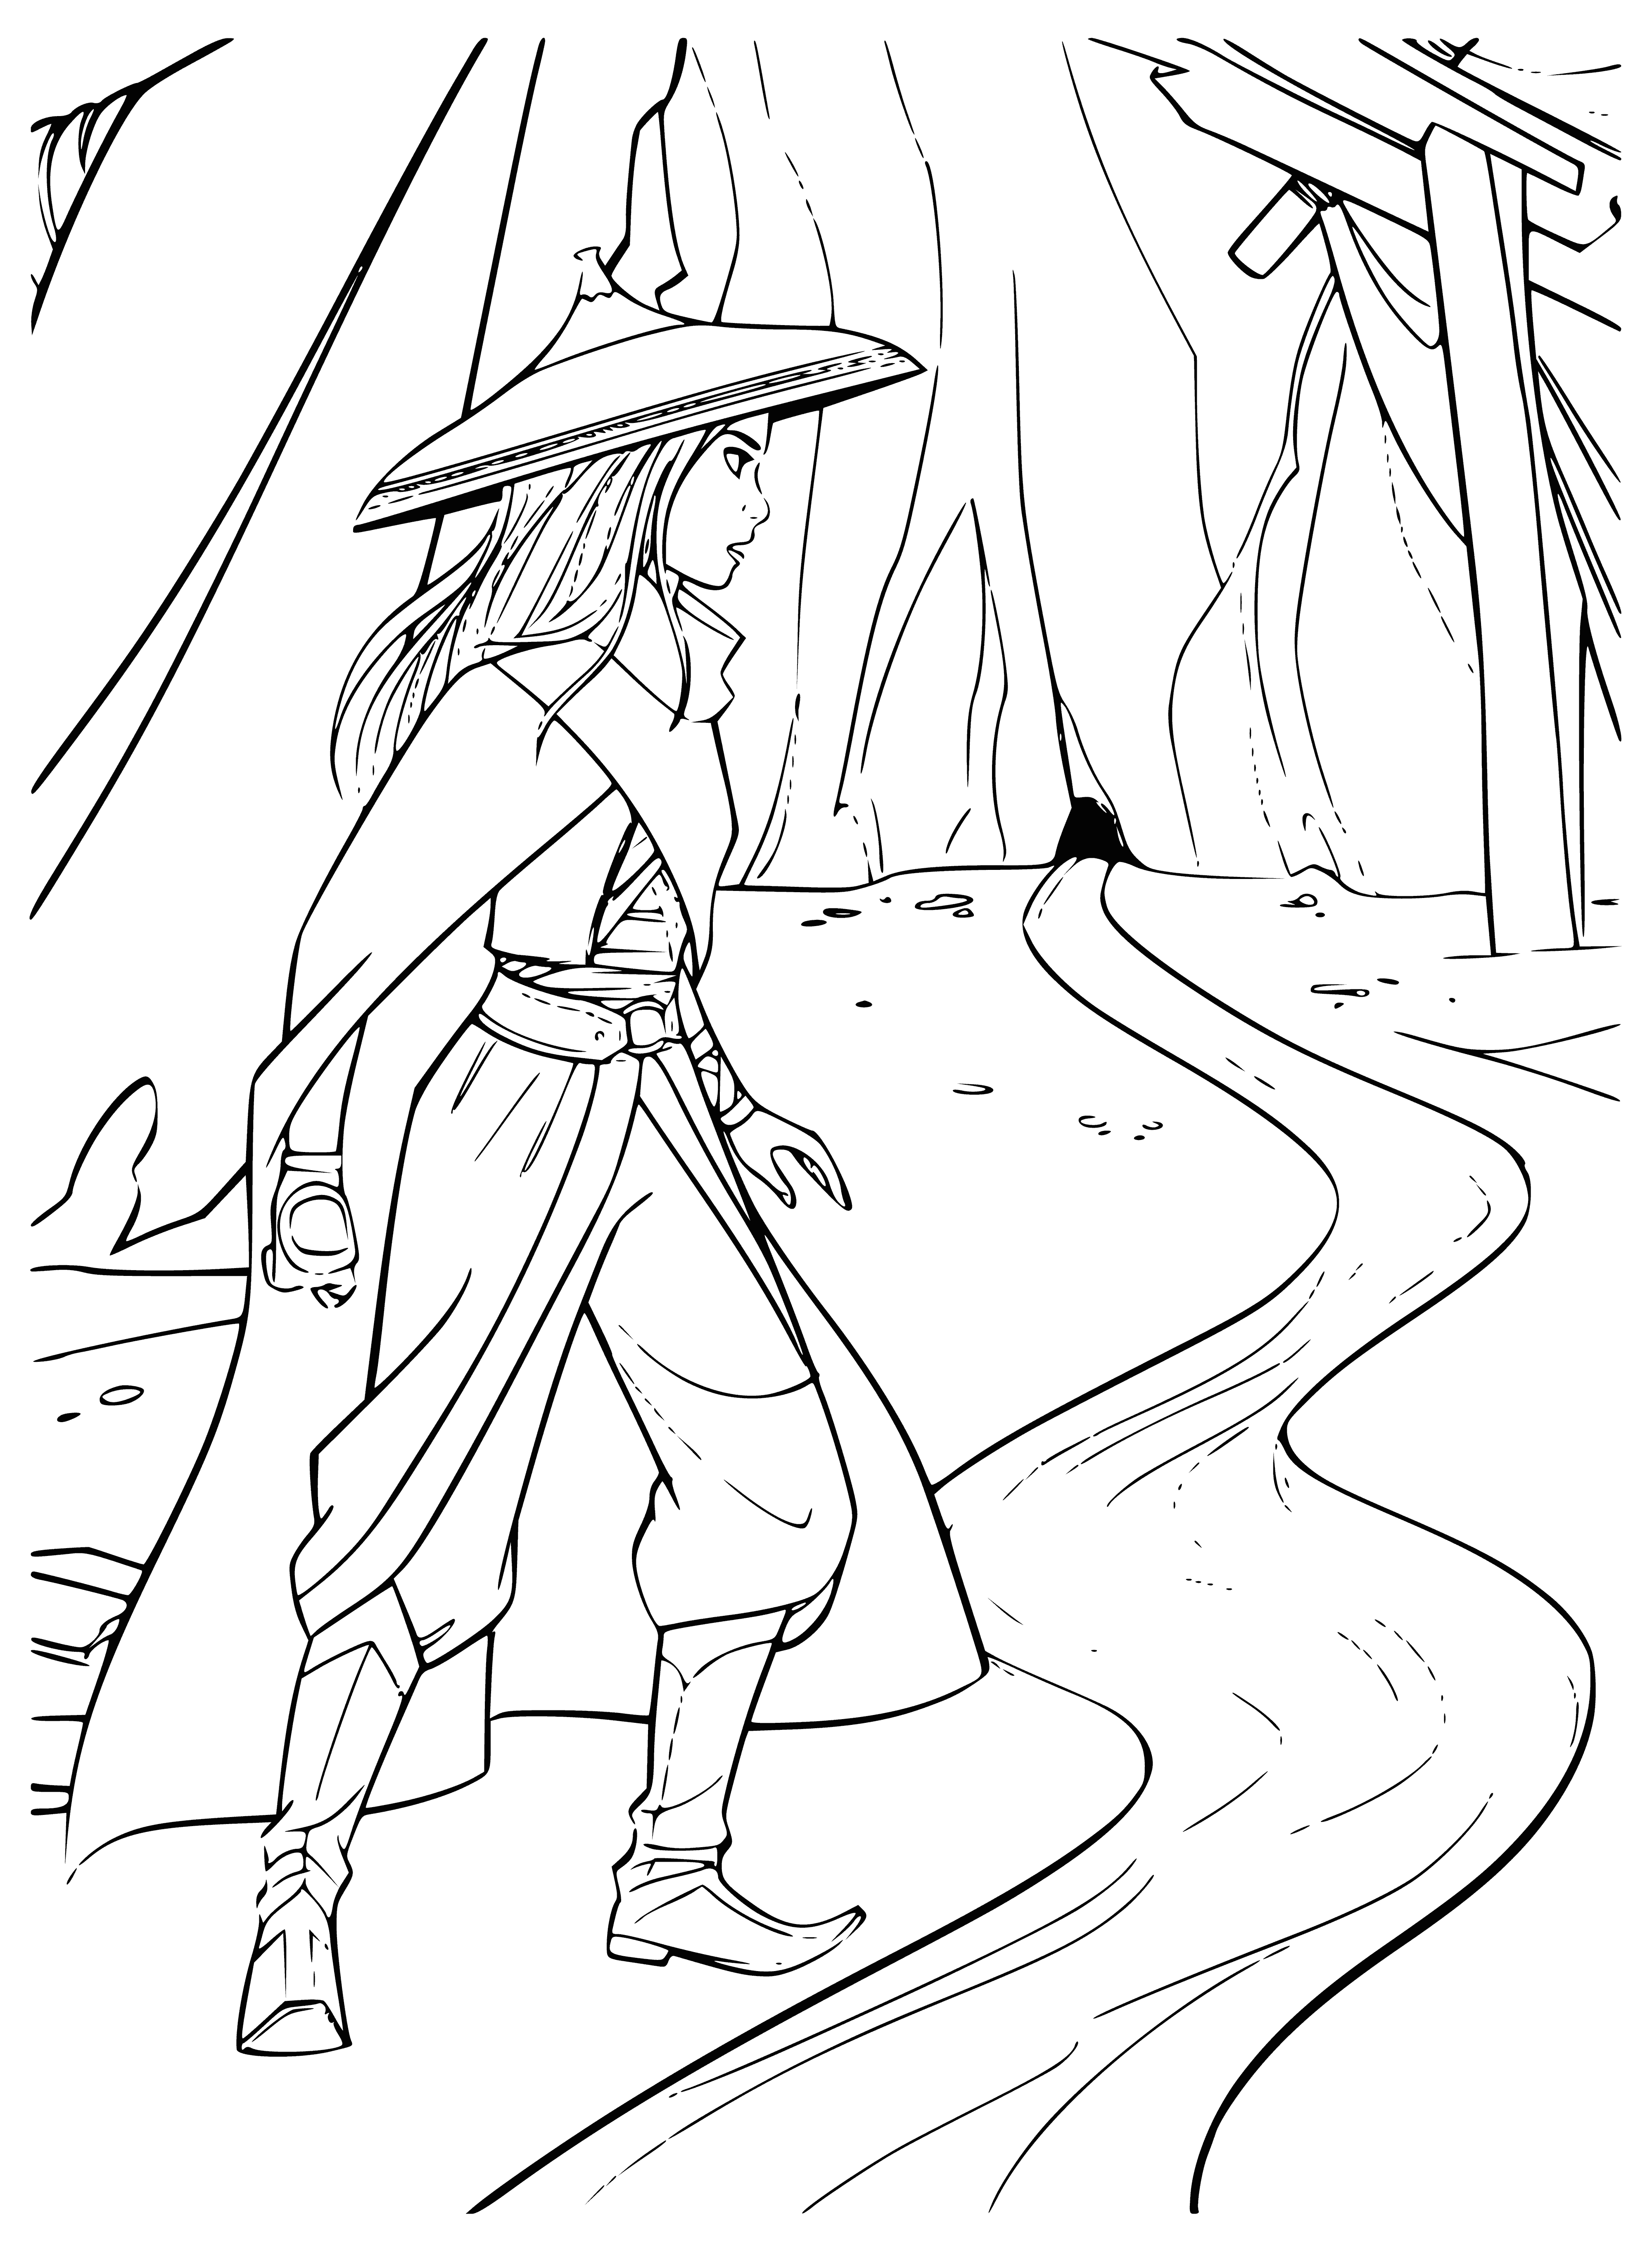 coloring page: A paradisiacal scene at a river with foliage, waterfall, beach, bridge & mountains - in the distance.